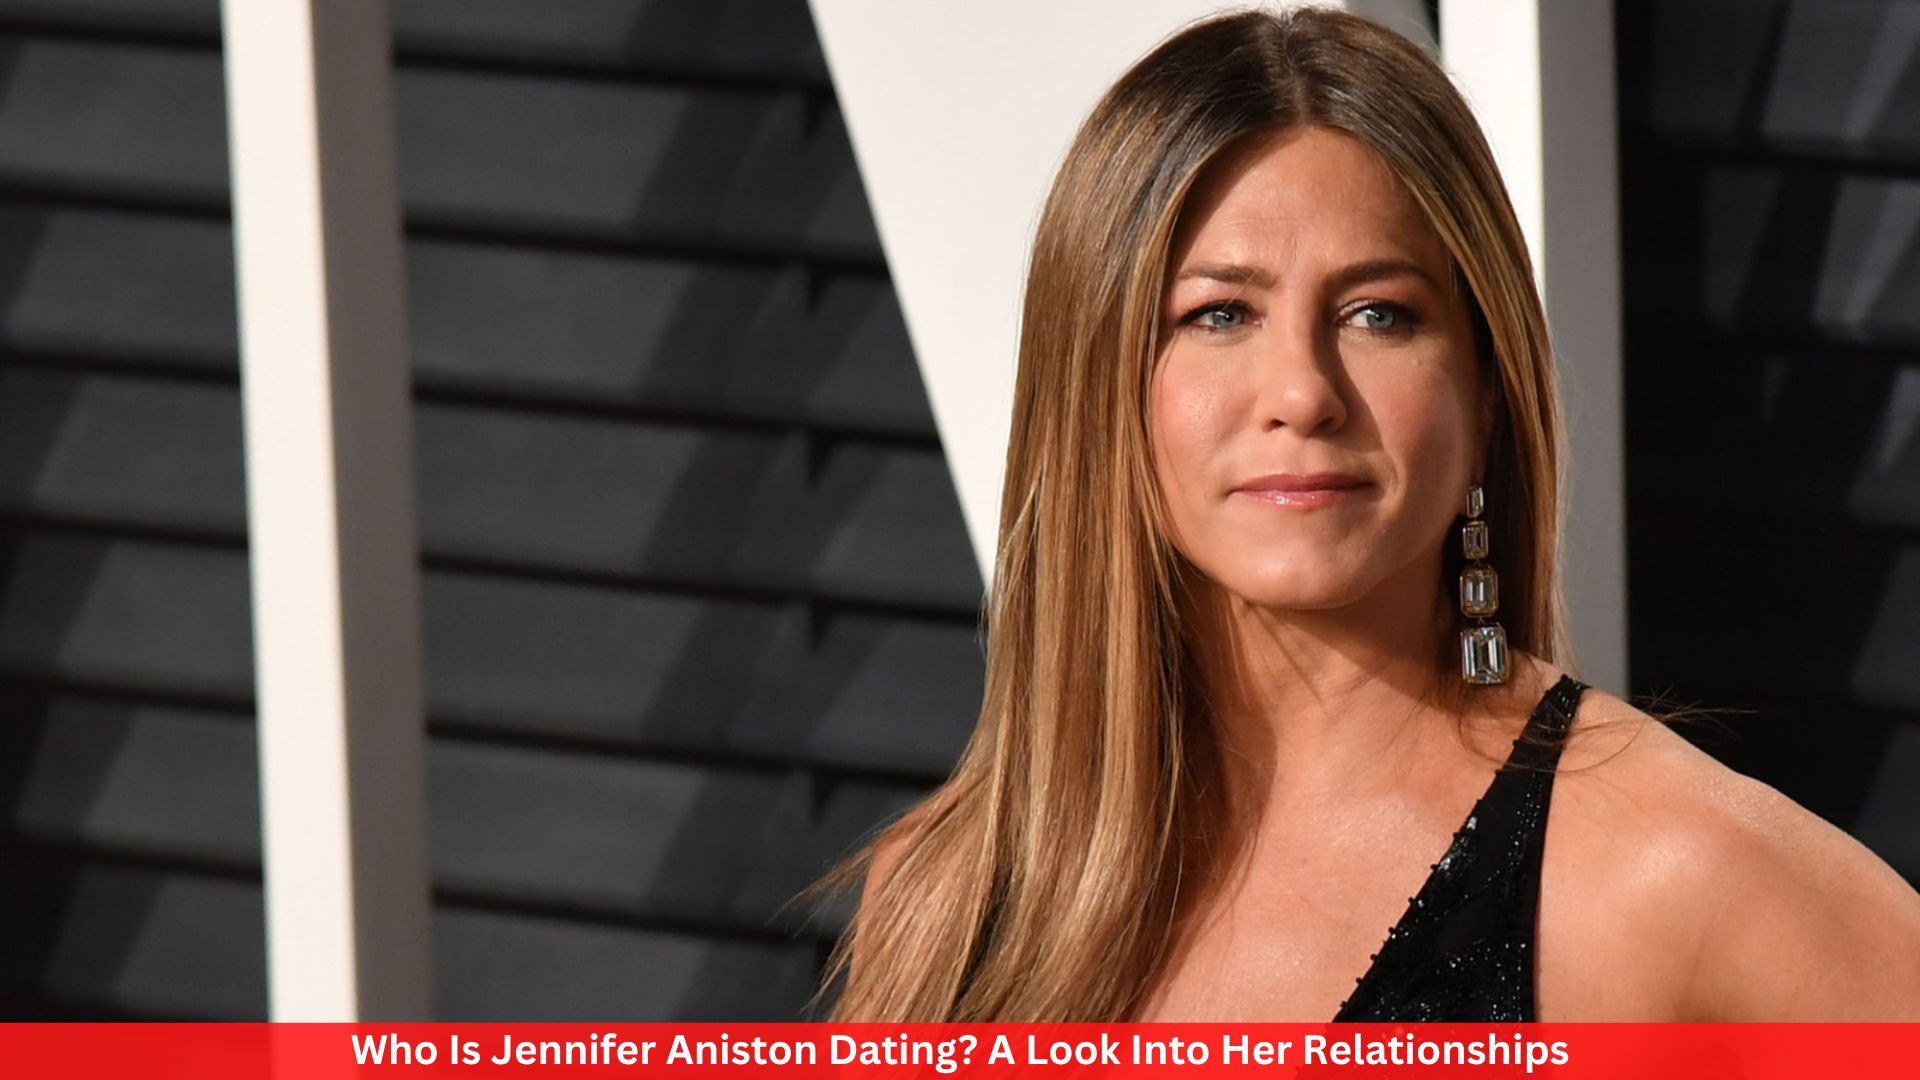 Who Is Jennifer Aniston Dating? A Look Into Her Relationships